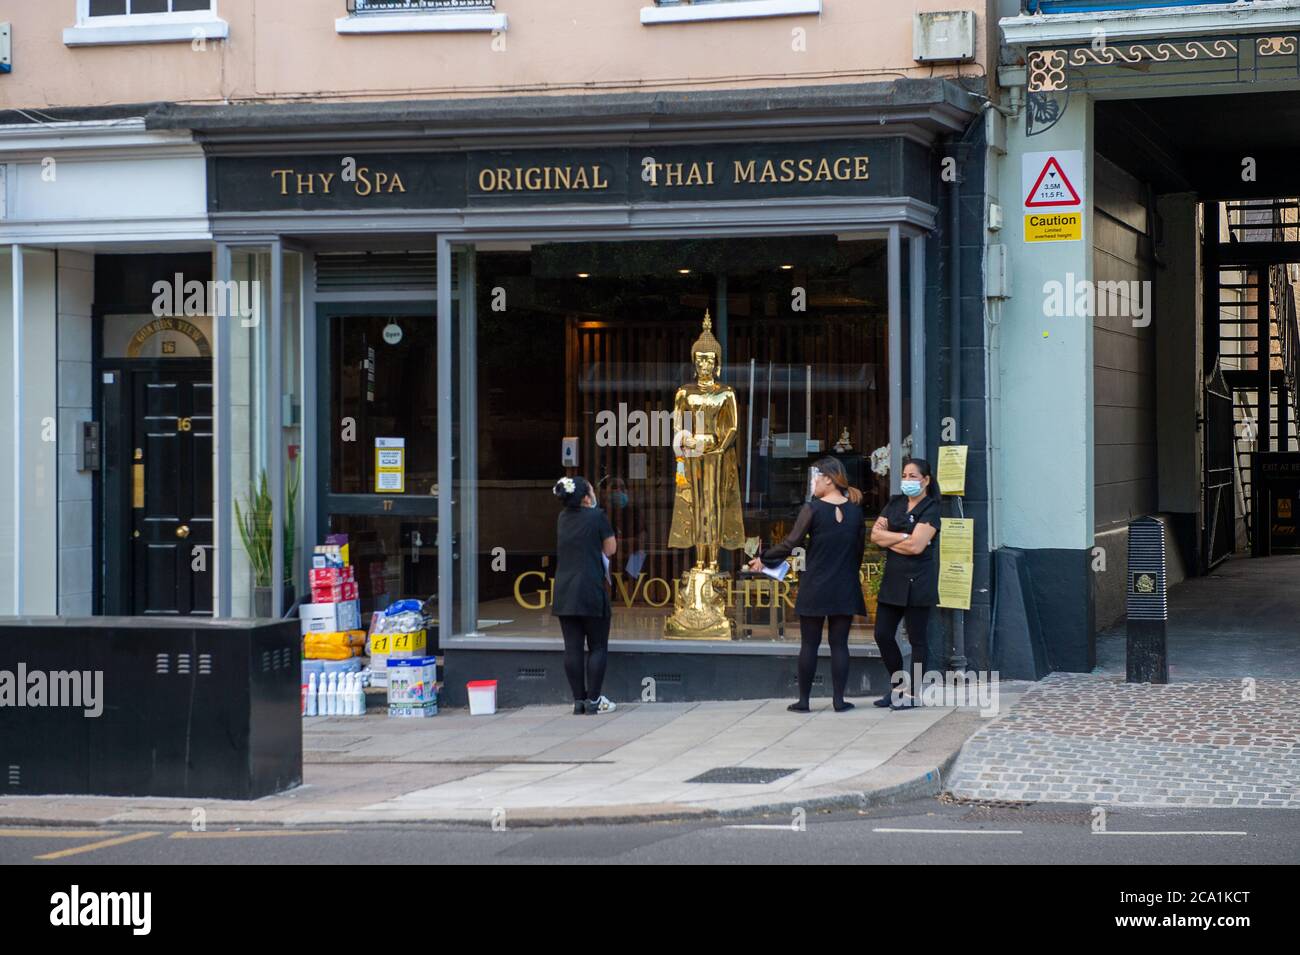 Windsor, Berkshire, UK. 3rd August, 2020. Staff wait outside the Thy Spa Thai Massage parlour in Windsor with cleaning materials. Credit: Maureen McLean/Alamy Stock Photo